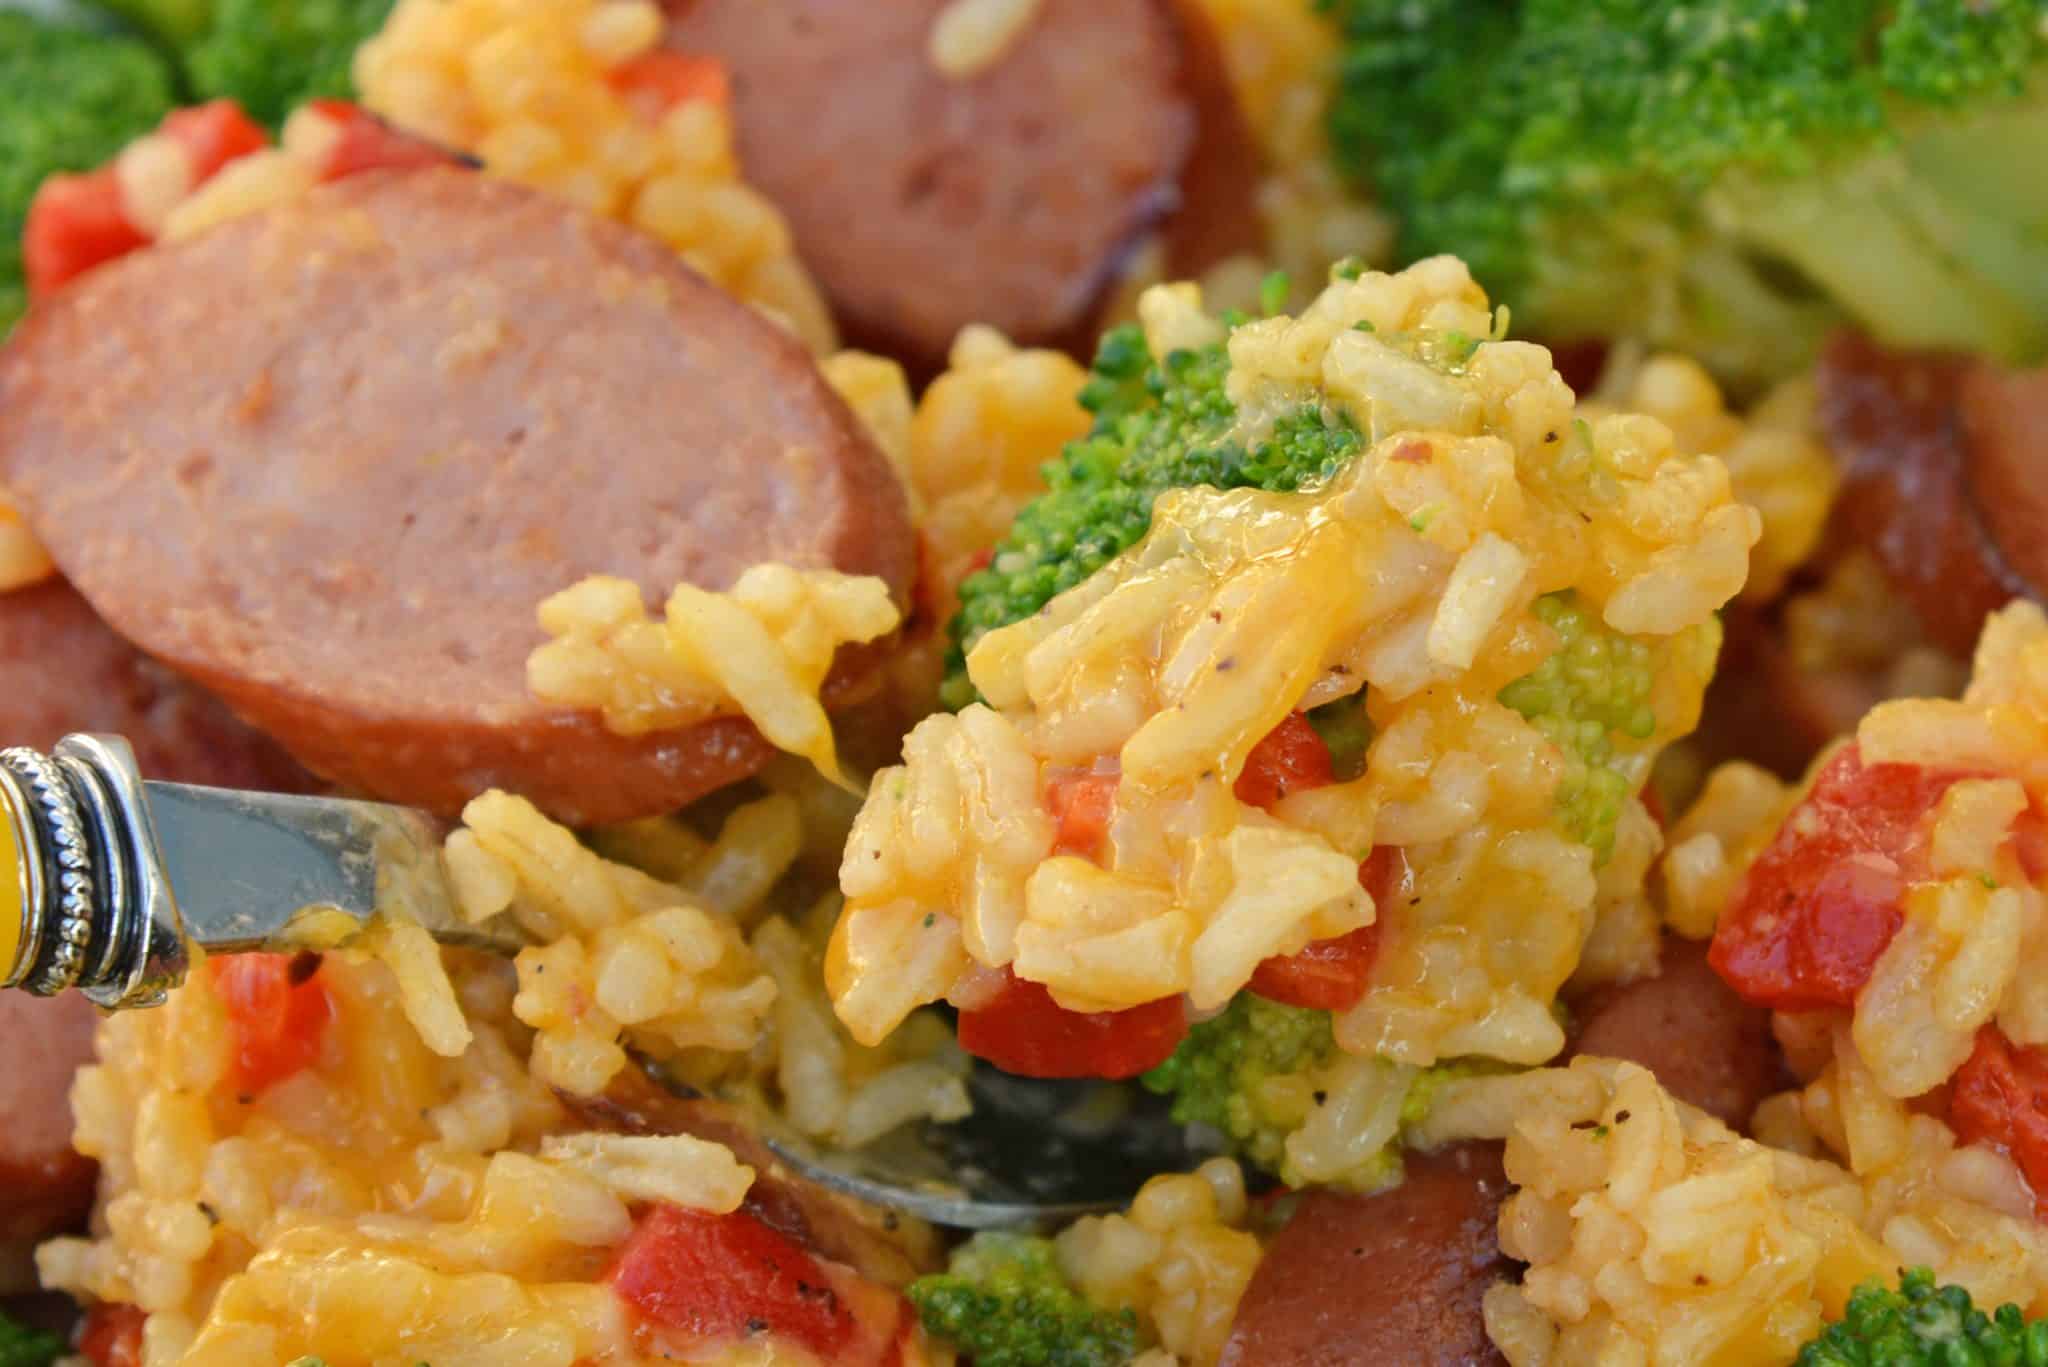 Sharp cheddar cheese tossed with rice, broccoli florets, roasted red pepper and tender Eckrich Smoked Sausage. Dinner is ready in just 15 minutes! #easydinnerideas #skilletmeals #onepandinner www.savoryexperiments.com 